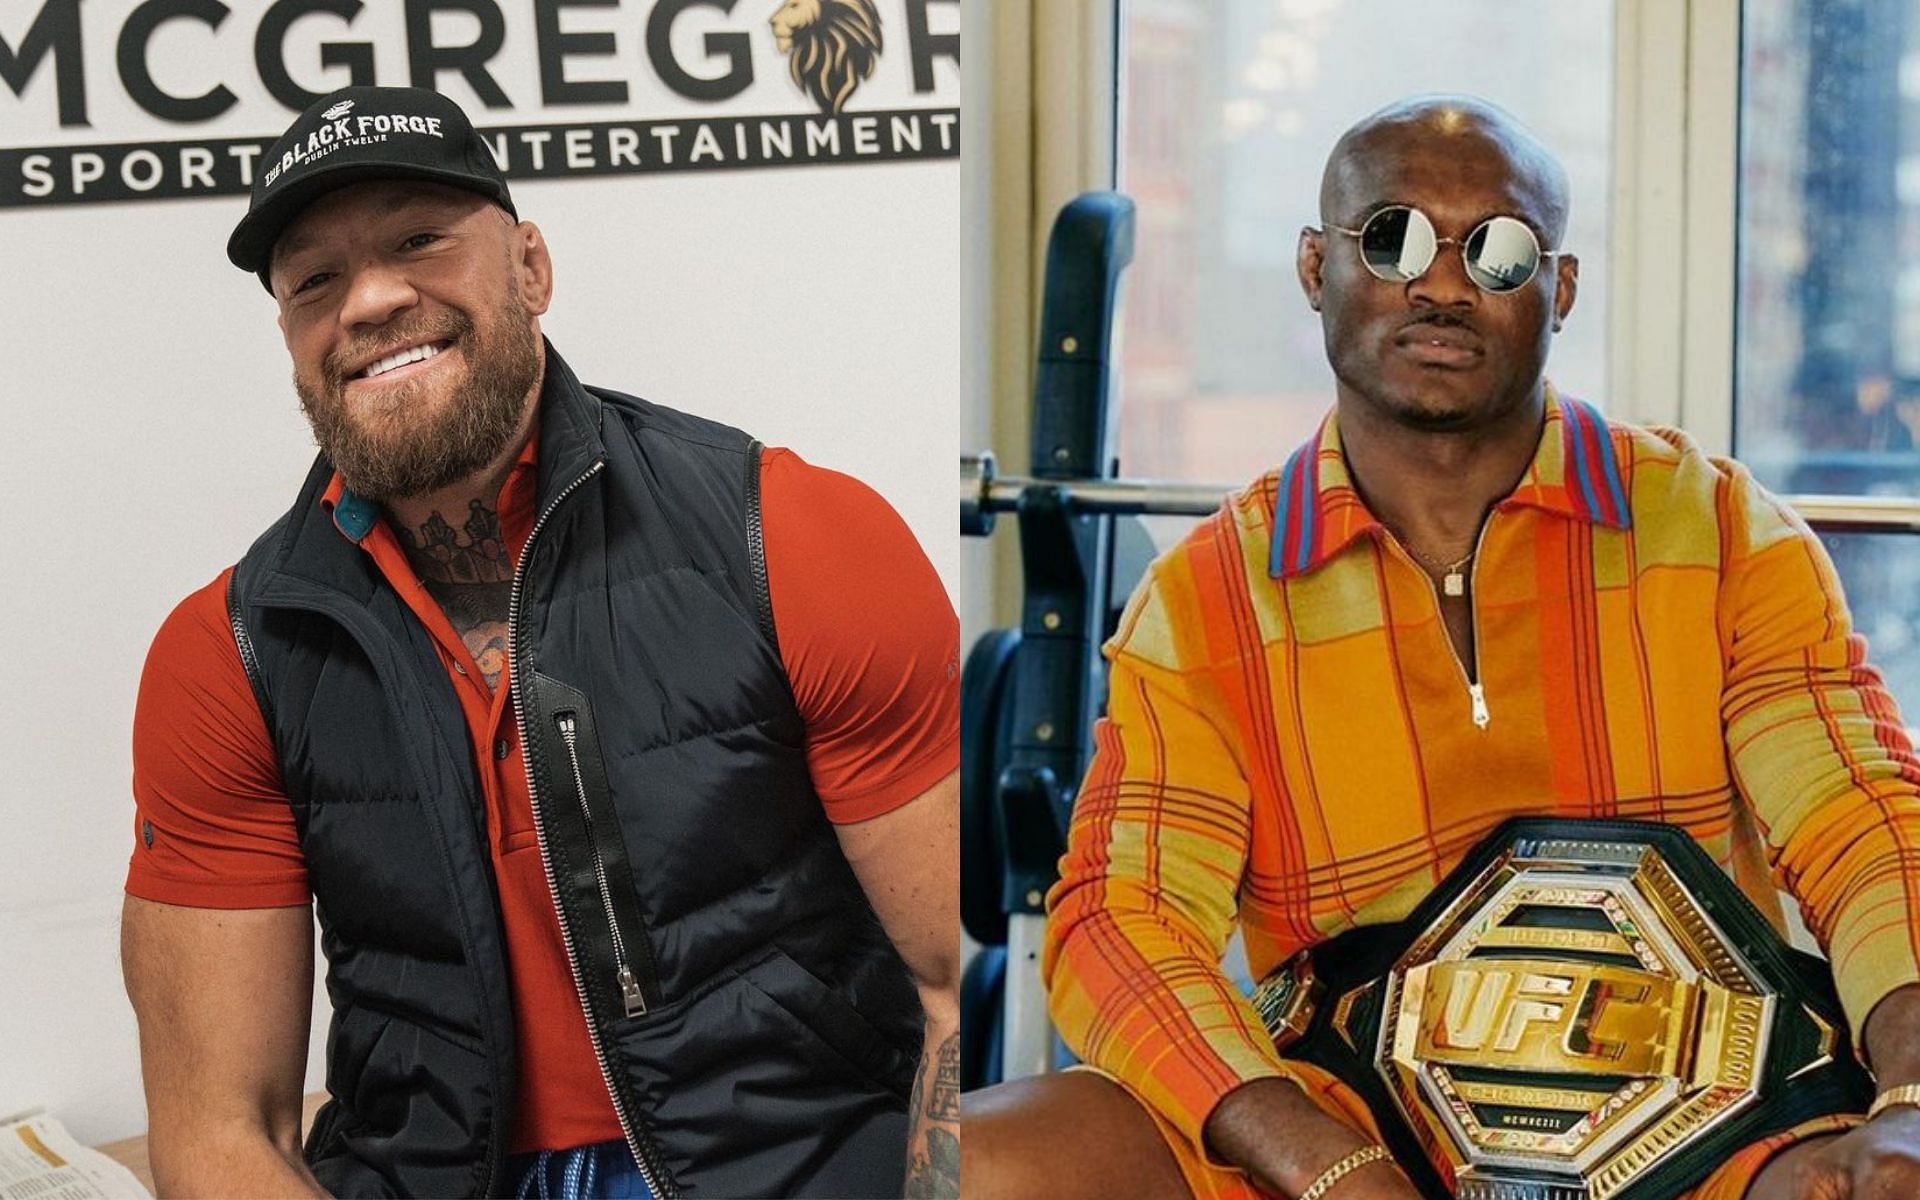 Conor McGregor (left) and Kamaru Usman (right) [Images via @thenotoriousmma and @usman84kg on Instagram]